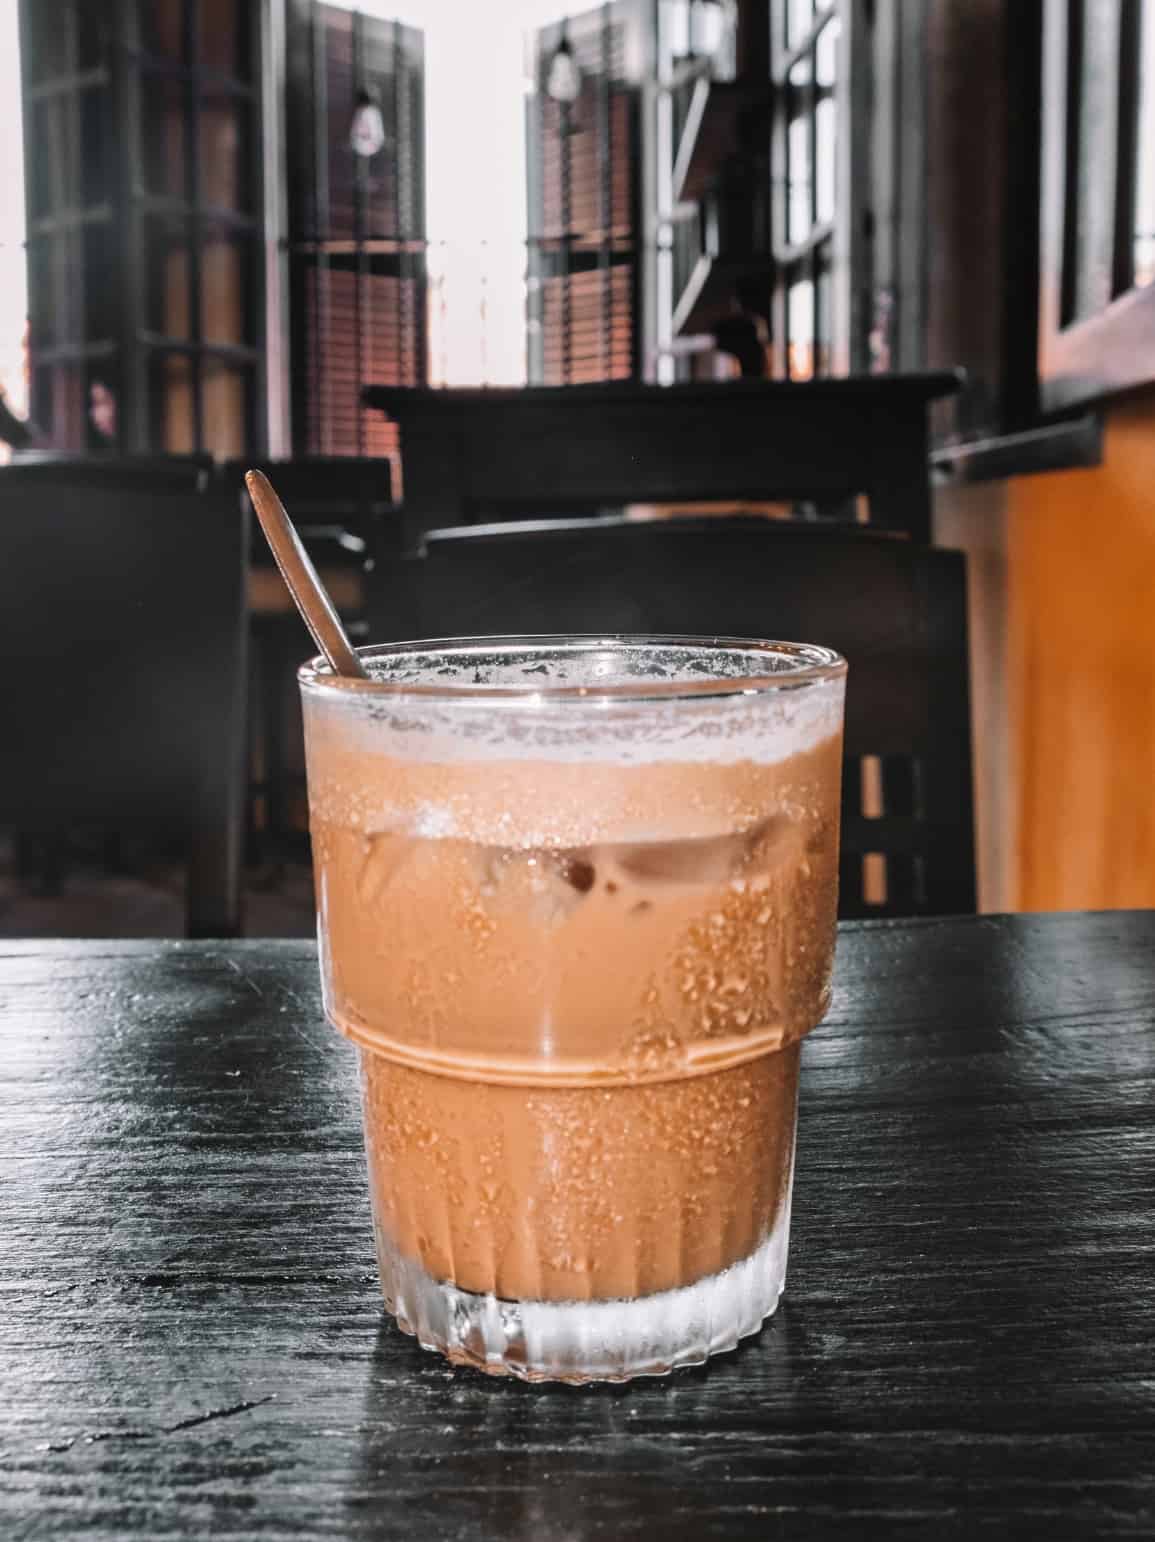 An iced coffee from Faifo Coffee. Be sure to add trying the city's coffee culture to your Hoi An itinerary. 